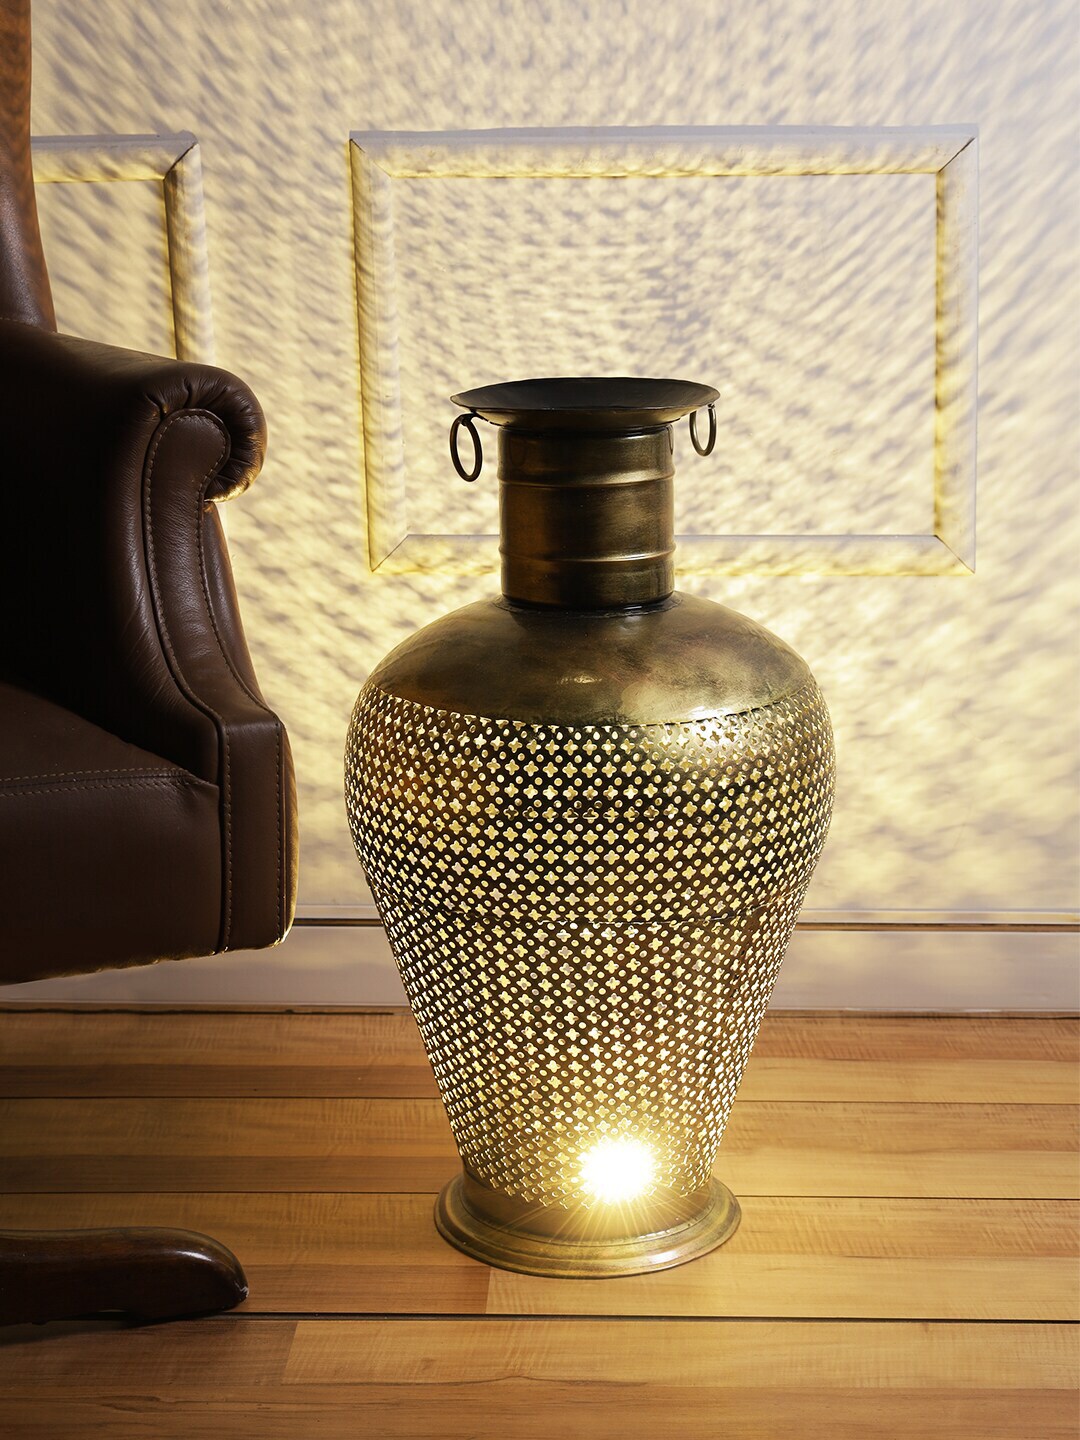 Aapno Rajasthan Gold Toned Traditional Textured Metal Lamp Price in India